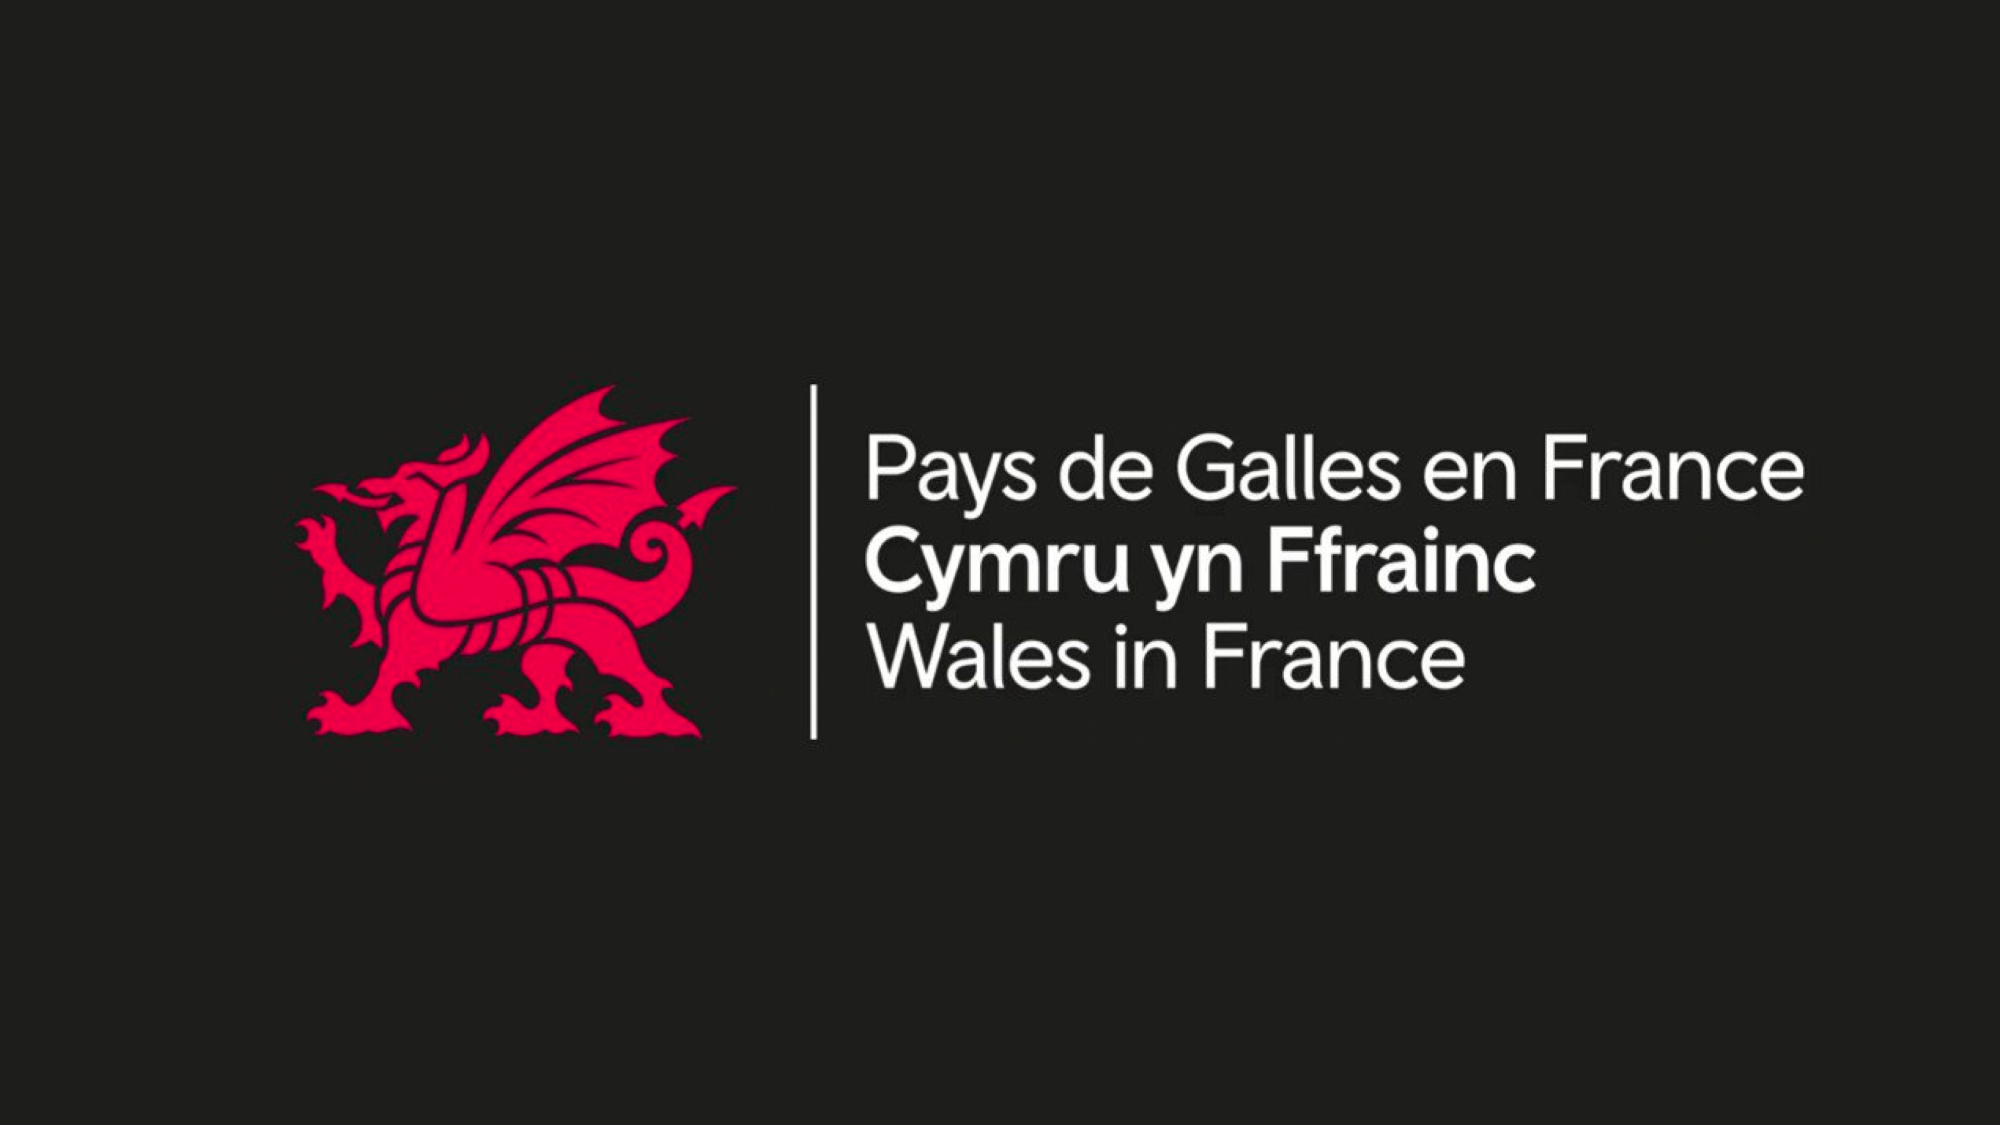 Welsh Government’s Wales in France Year